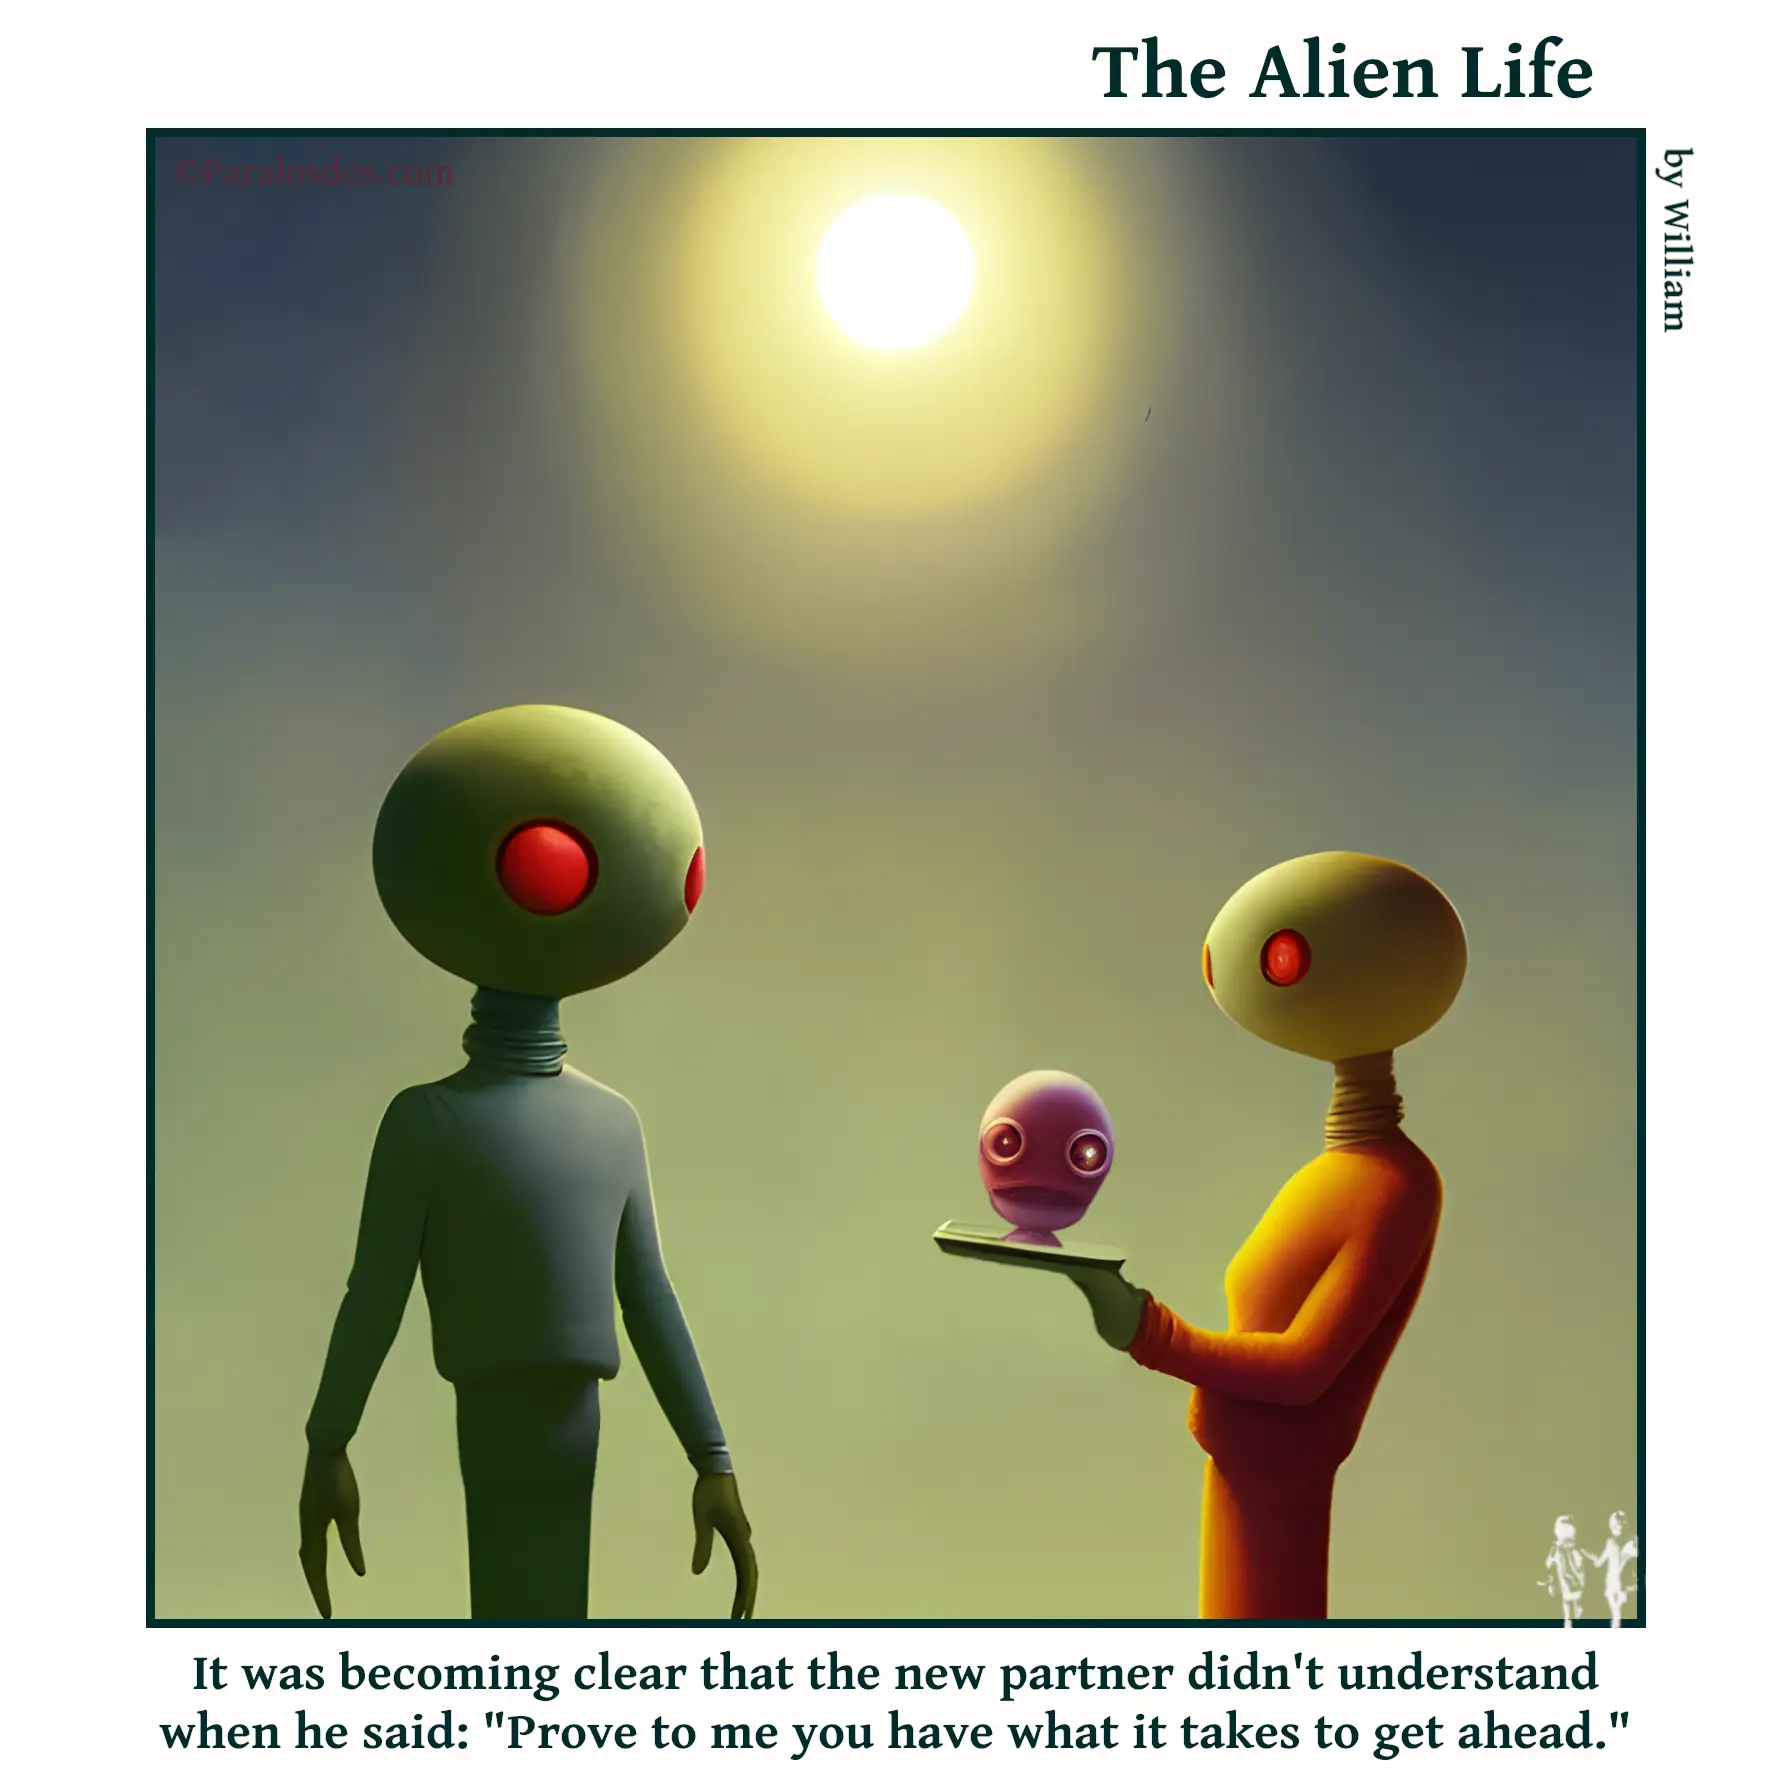 The Alien Life, one panel Comic. An alien is approaching another alien carrying a plate with a head sitting on it. The caption reads: It was becoming clear that the new partner didn't understand when he said: "Prove to me you have what it takes to get ahead."